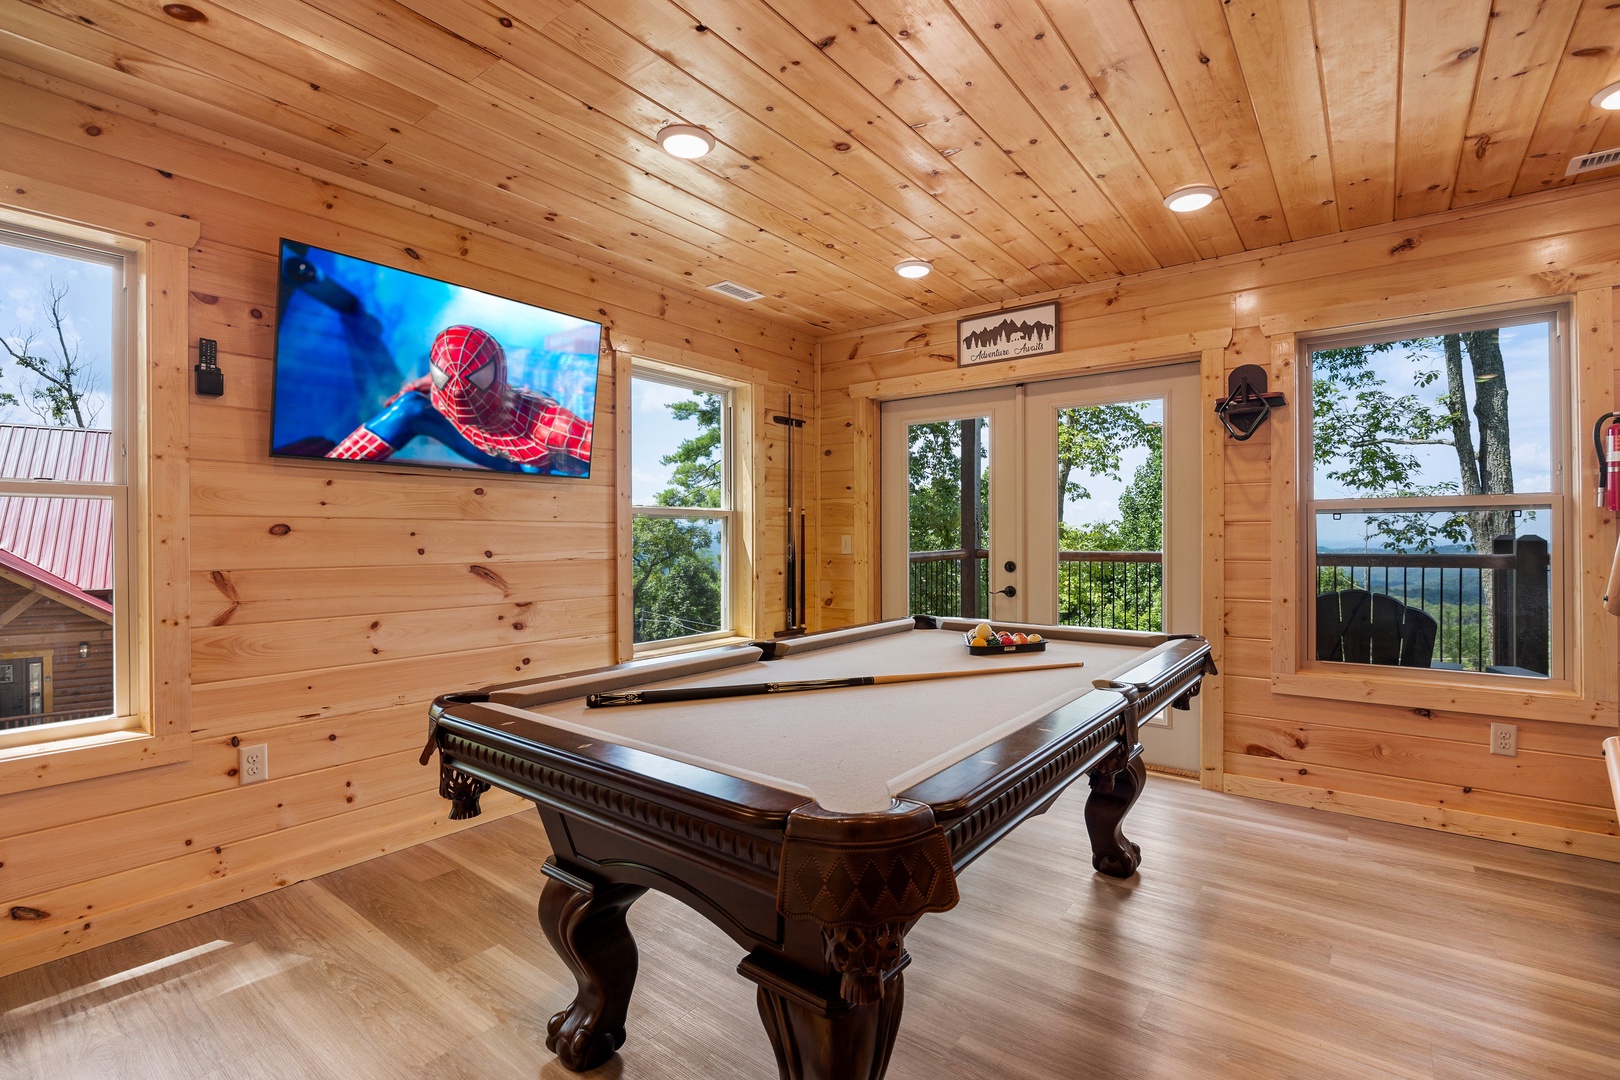 Pool Table at Mountain Top Views